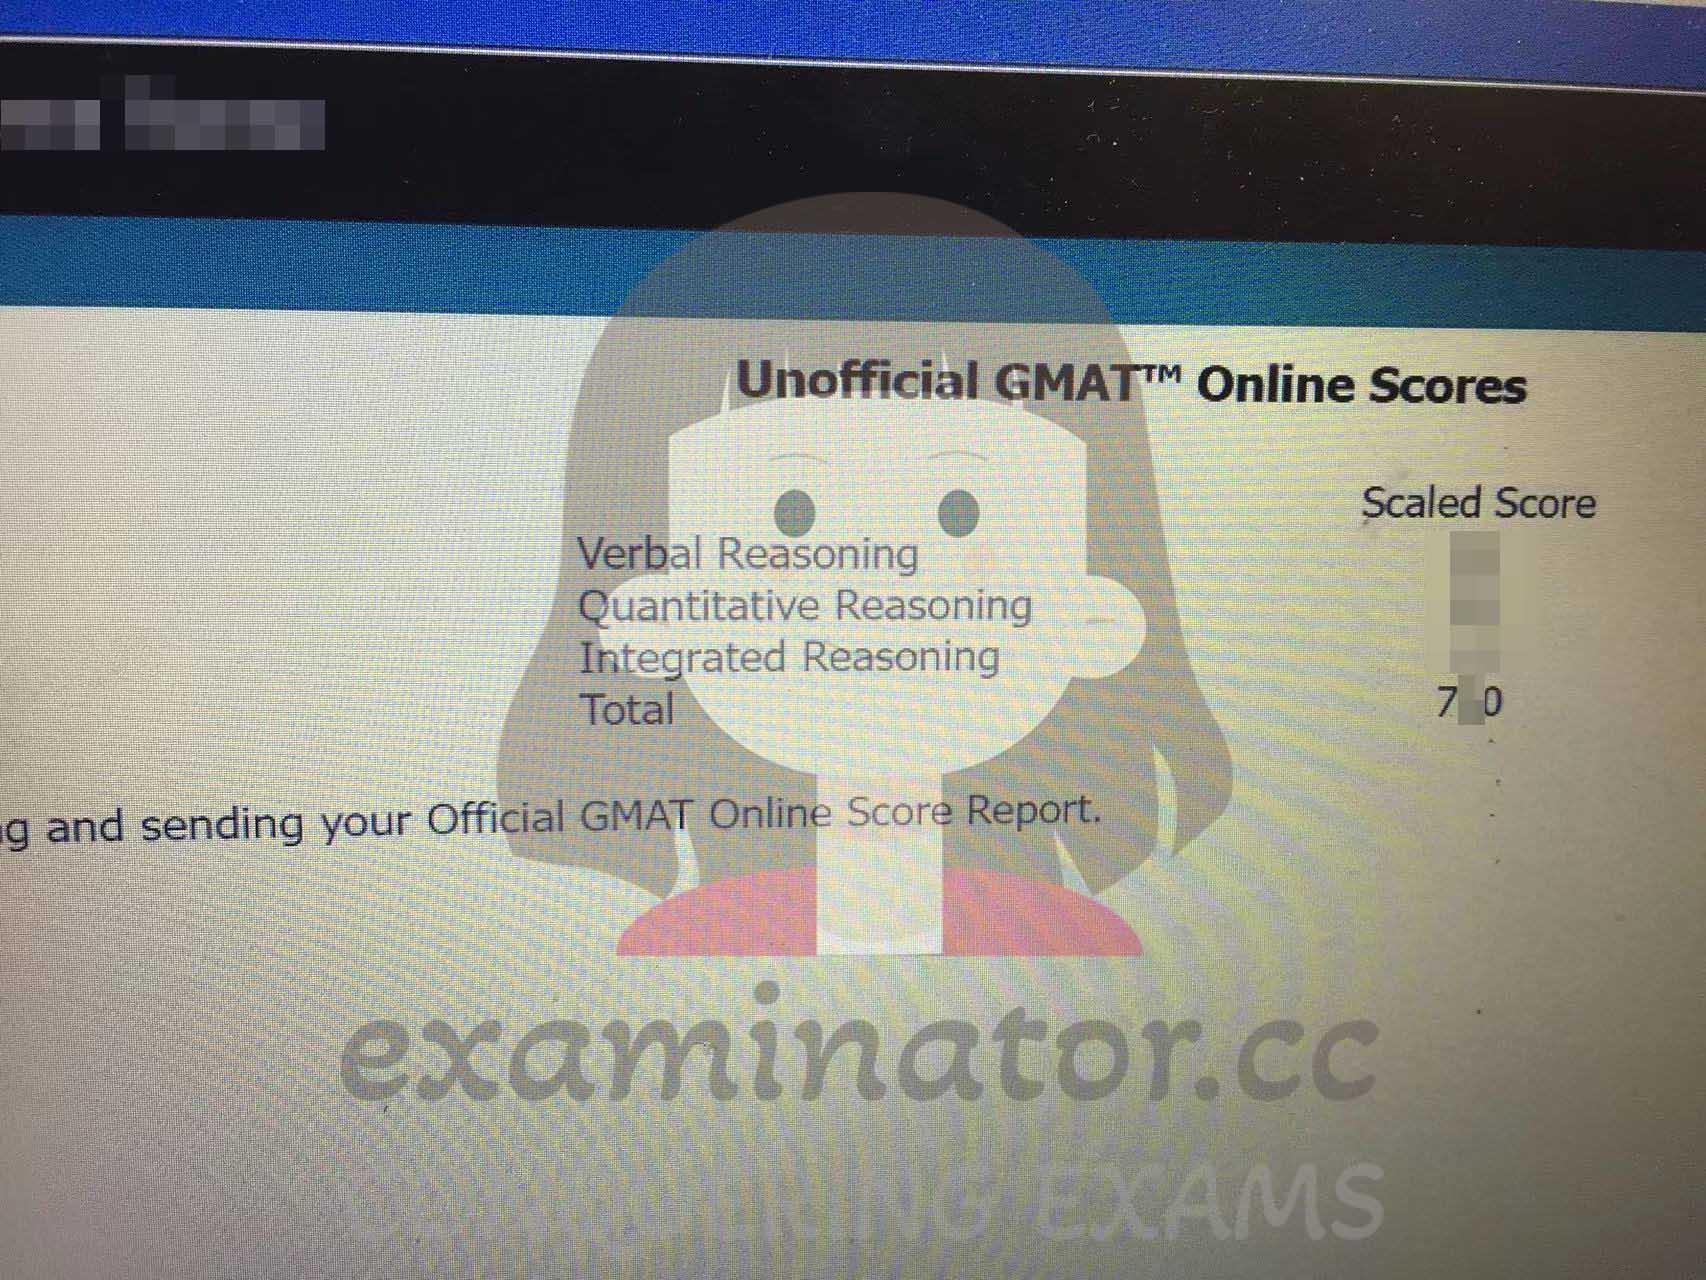 🇧🇾From "Stressful" to "Amazing": Belarusian Client Conquers GMAT Double Check-in Stress, Scores Over 720 with Our GMAT Cheating Expert Assistance 👩🏻‍💻🌟